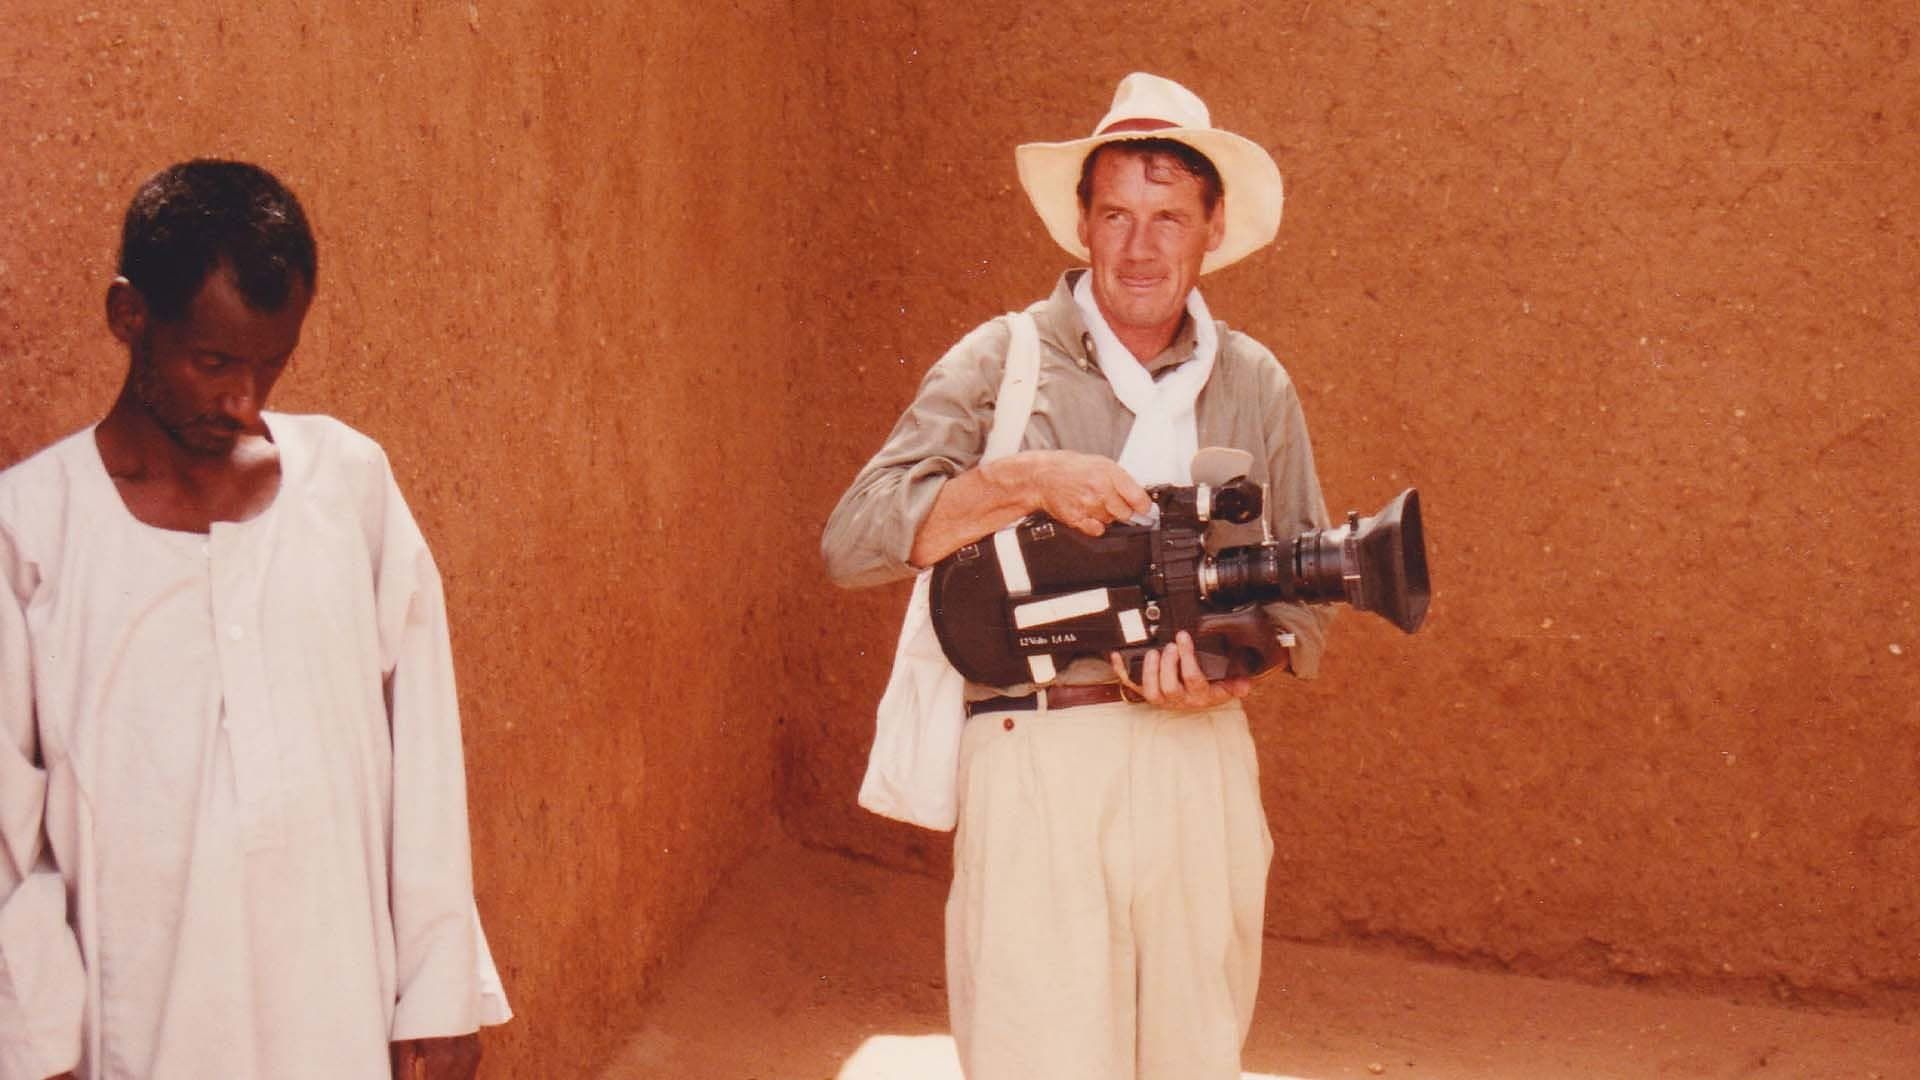 Michael Palin: Travels of a Lifetime background